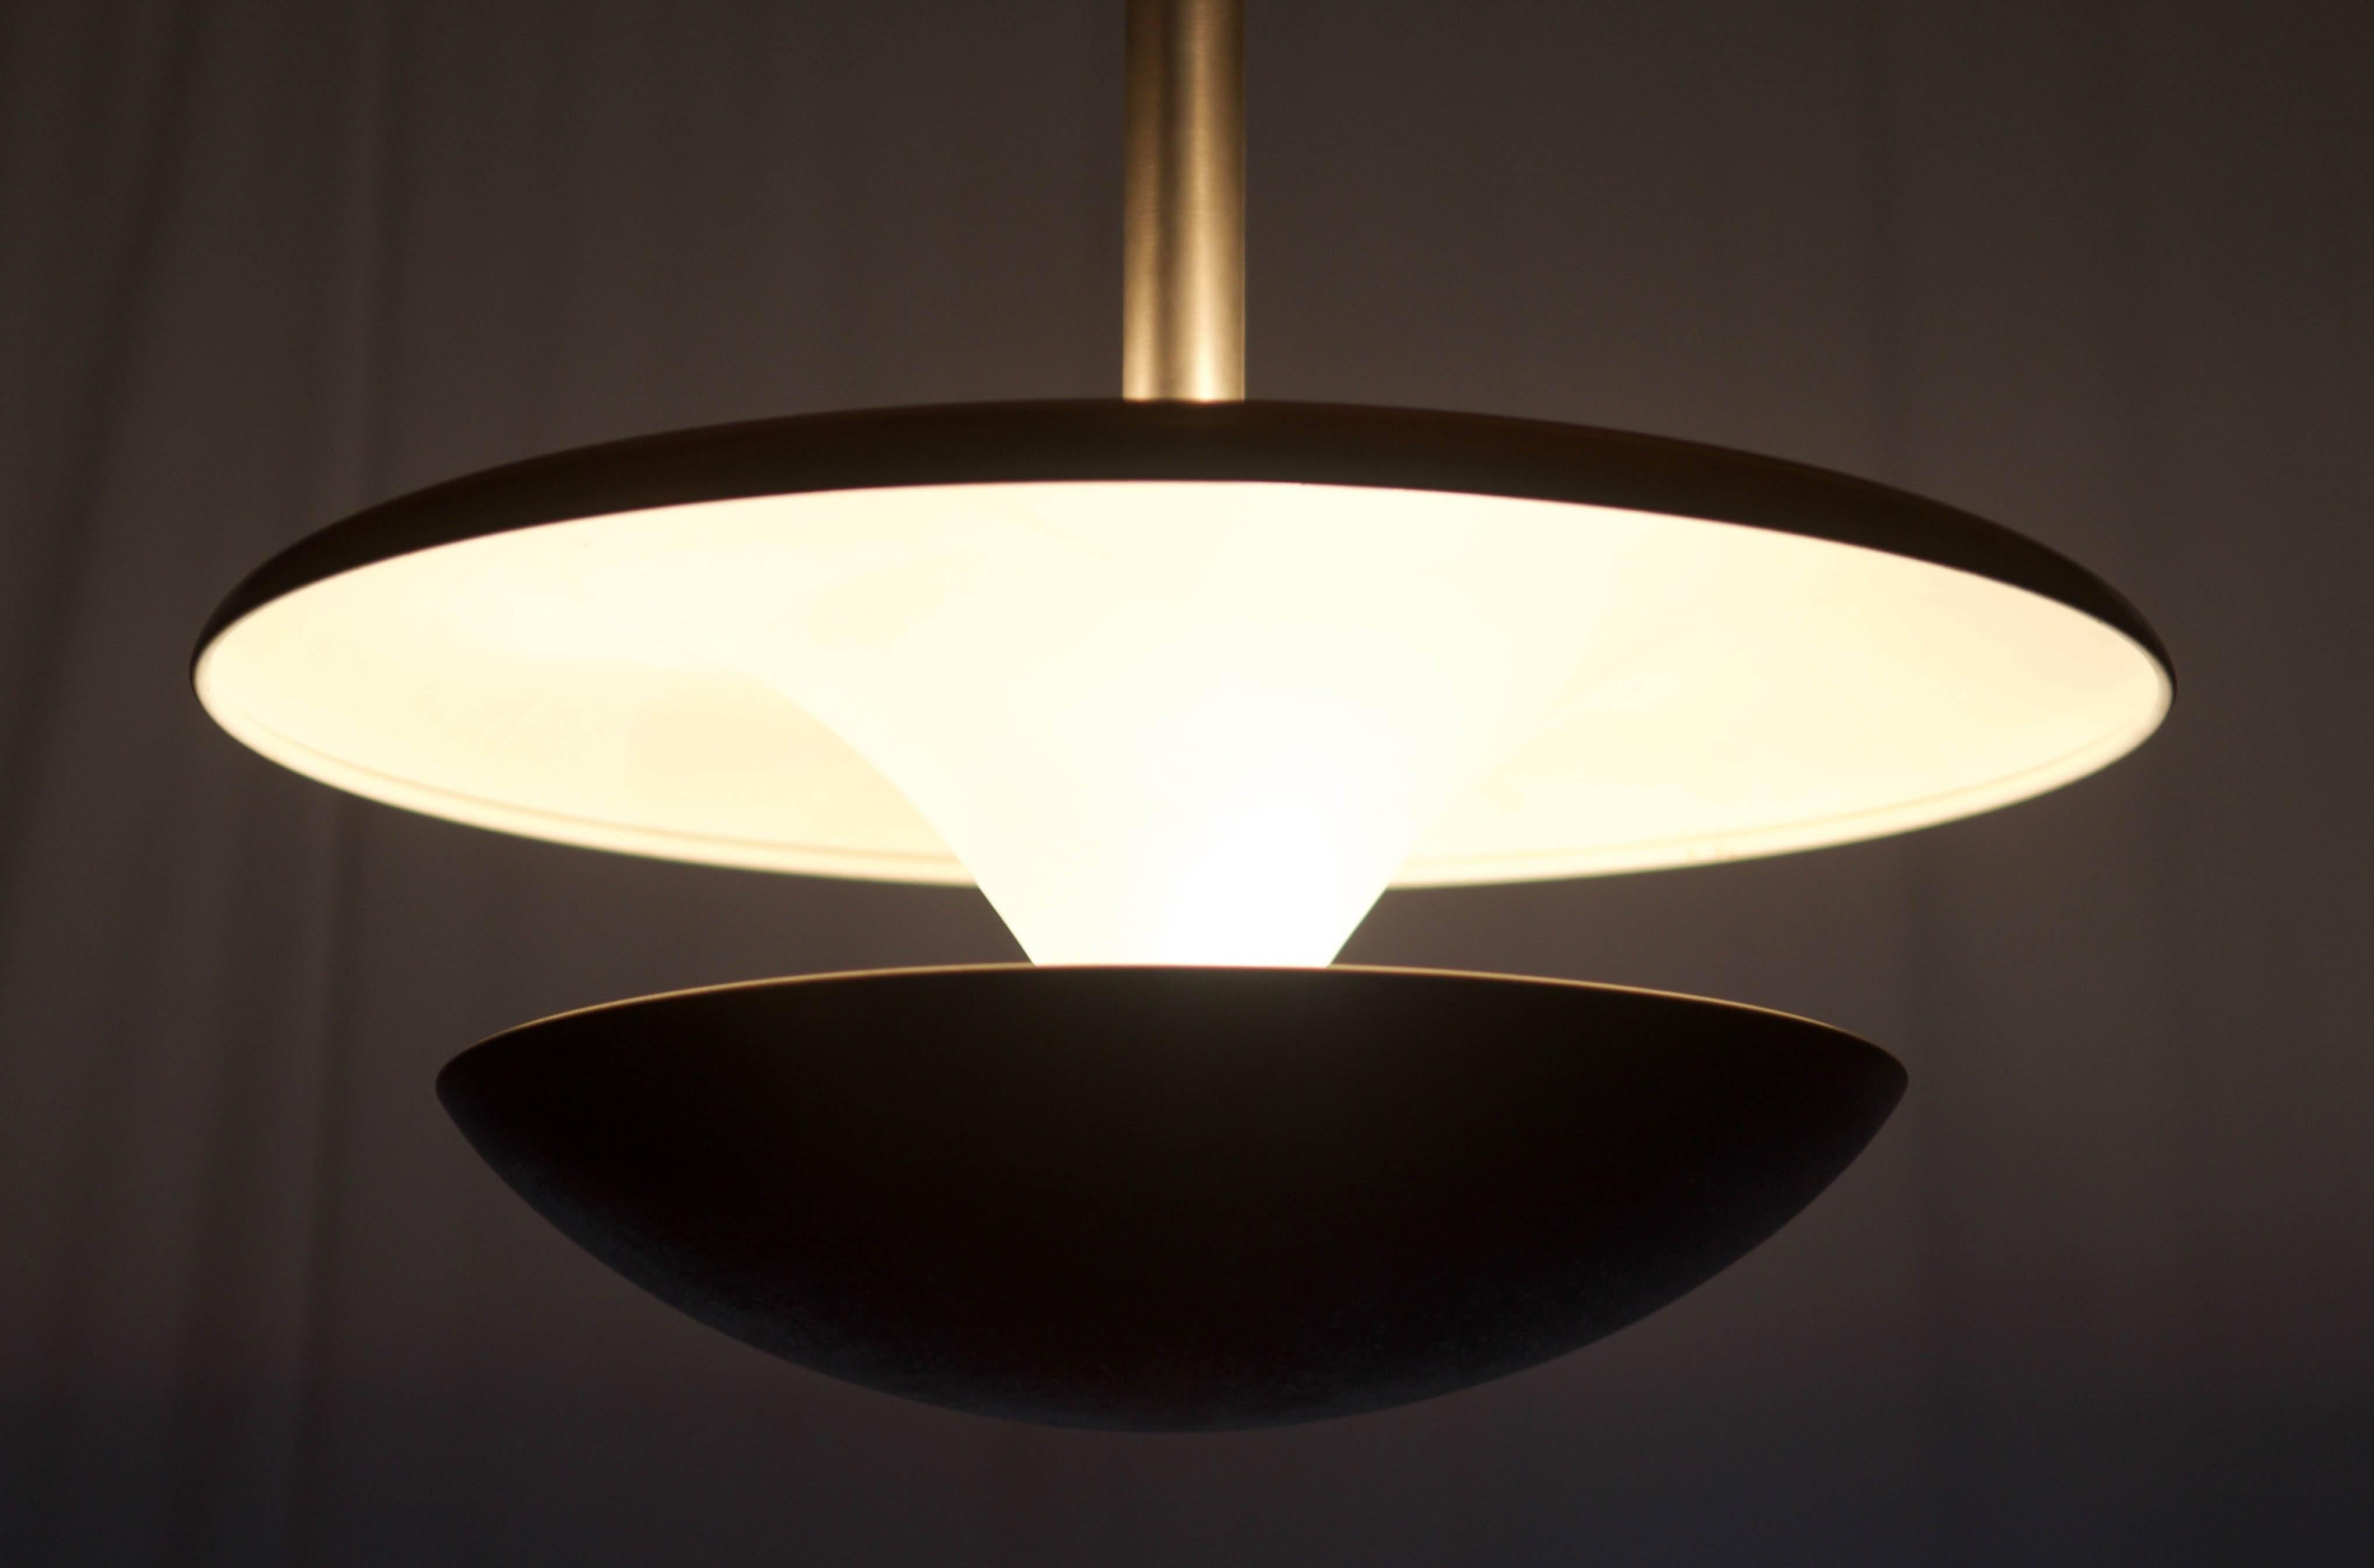 Simple and beautiful Bauhaus design for indirect lighting made in the 1930 by Franta Anýž for Napako.
Steel construction nickel-plated and enameled fitted with six E27 sockets.